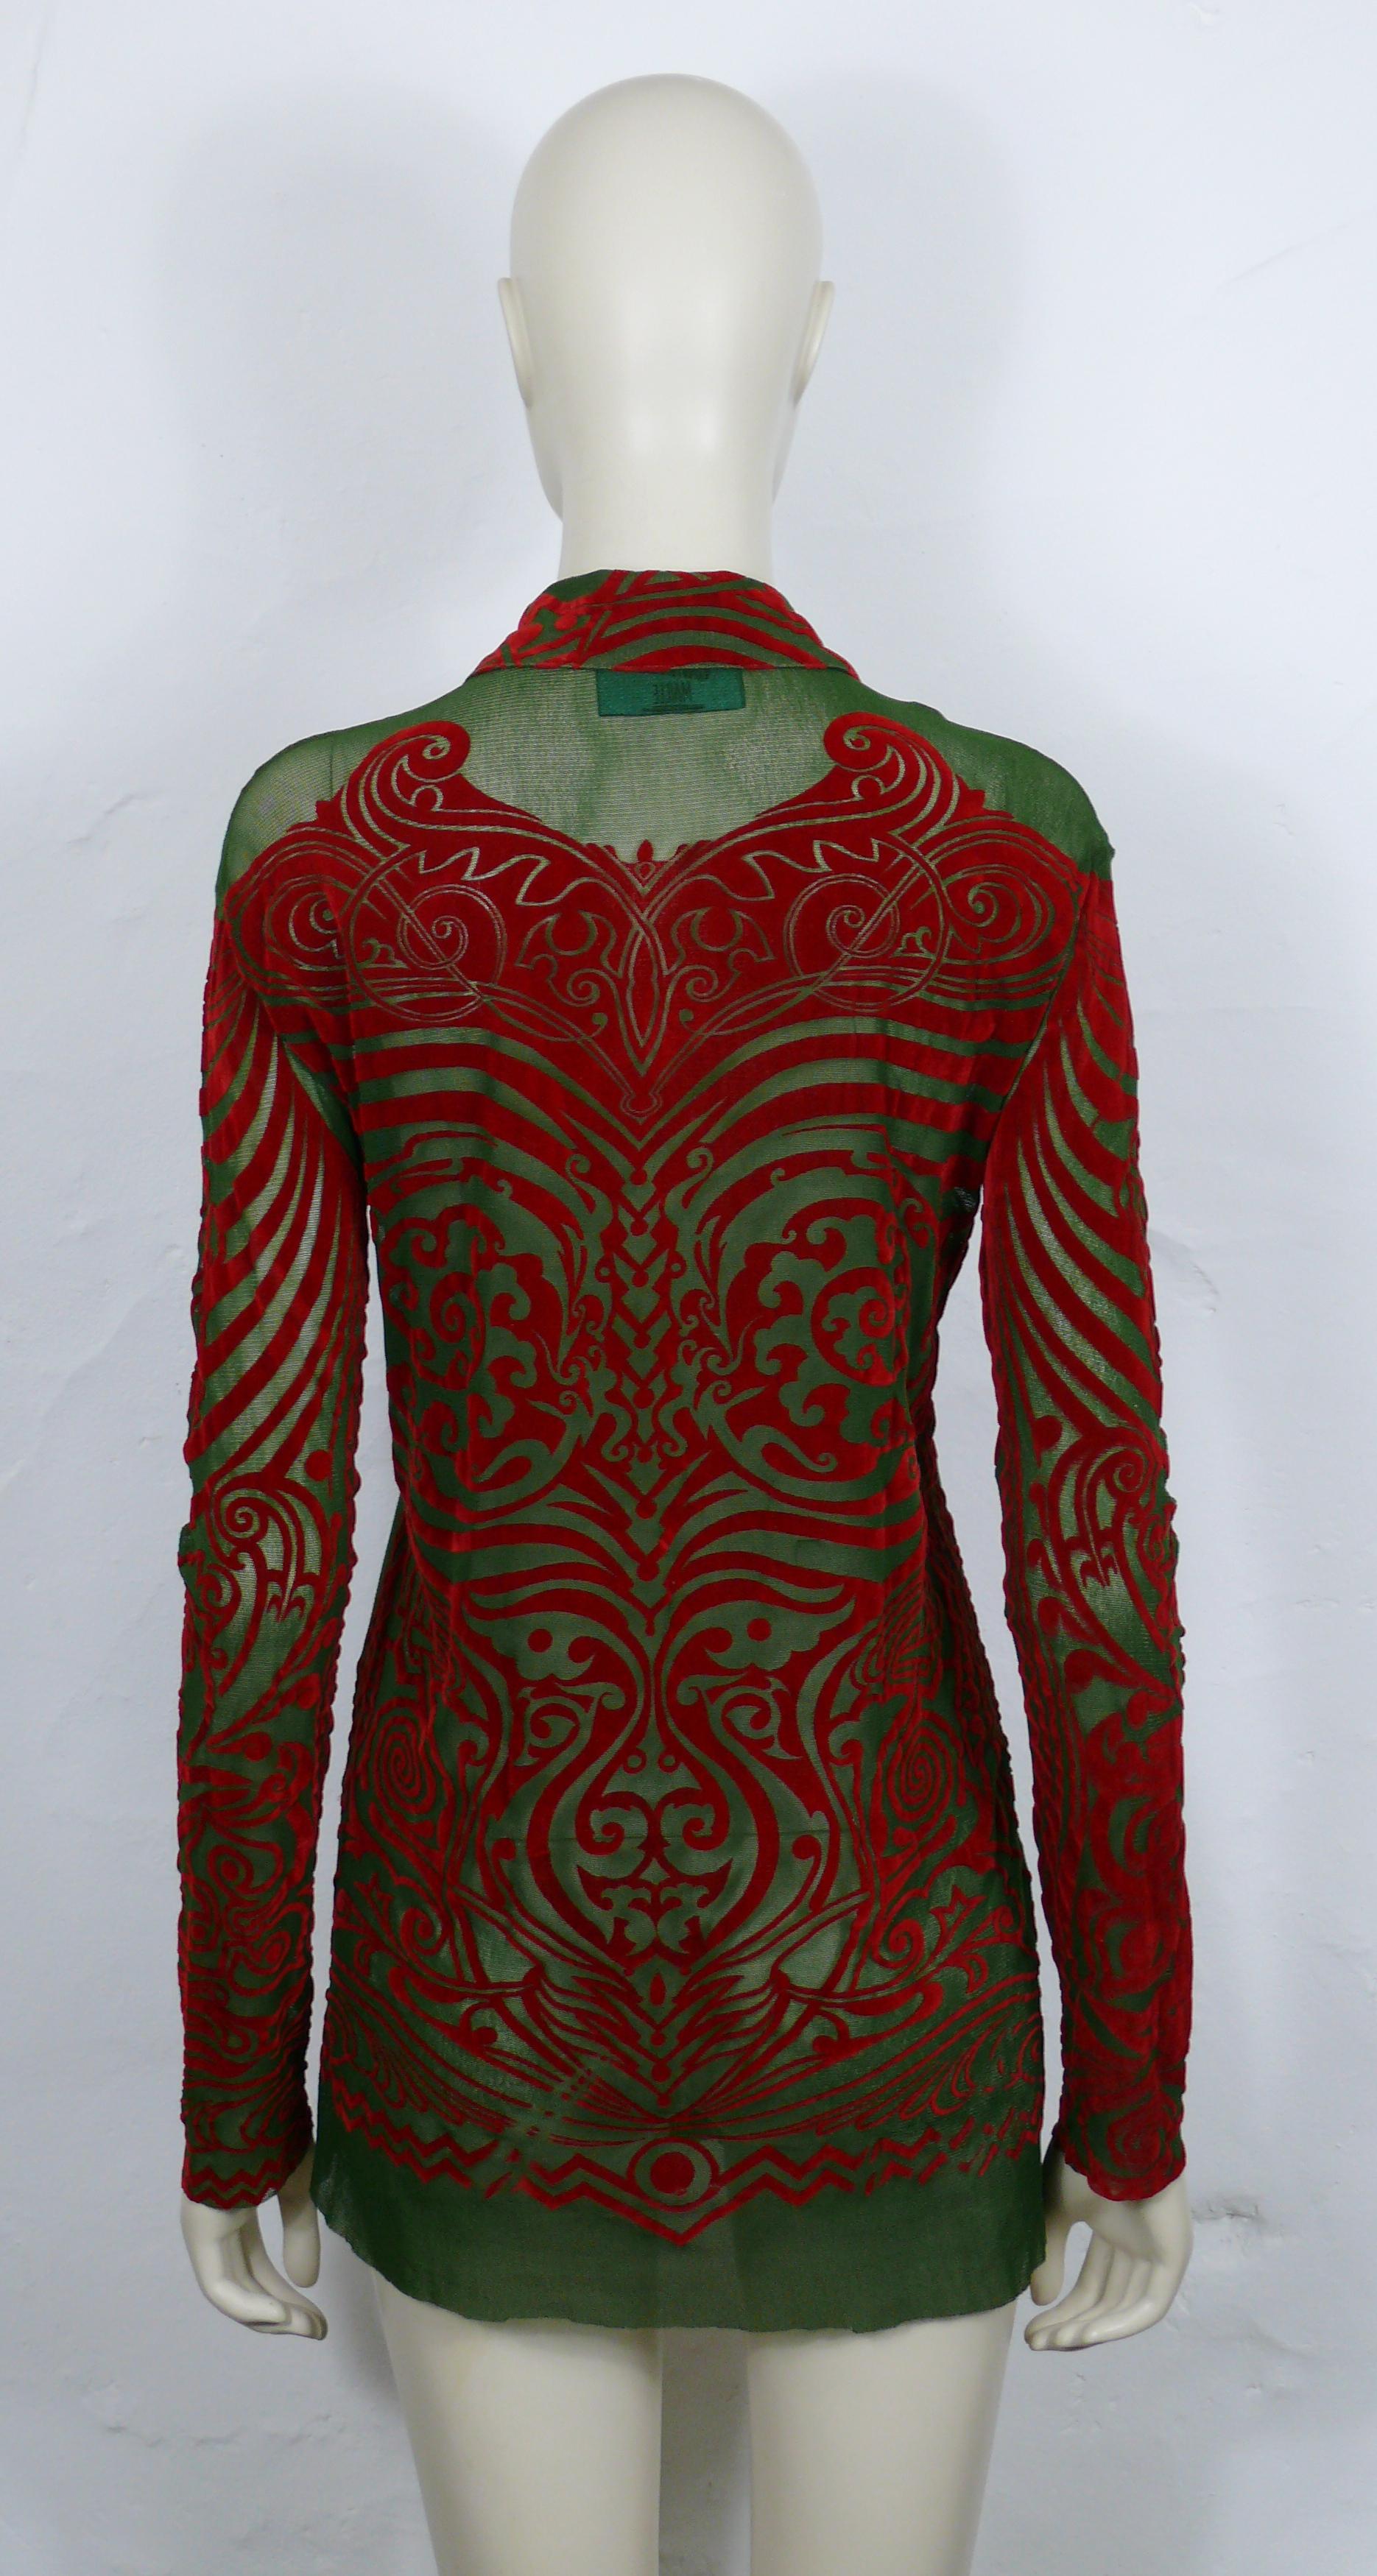 JEAN PAUL GAULTIER Vintage 1996 Iconic Green/Red Tribal Tattoo Mesh Shirt Size L For Sale 2